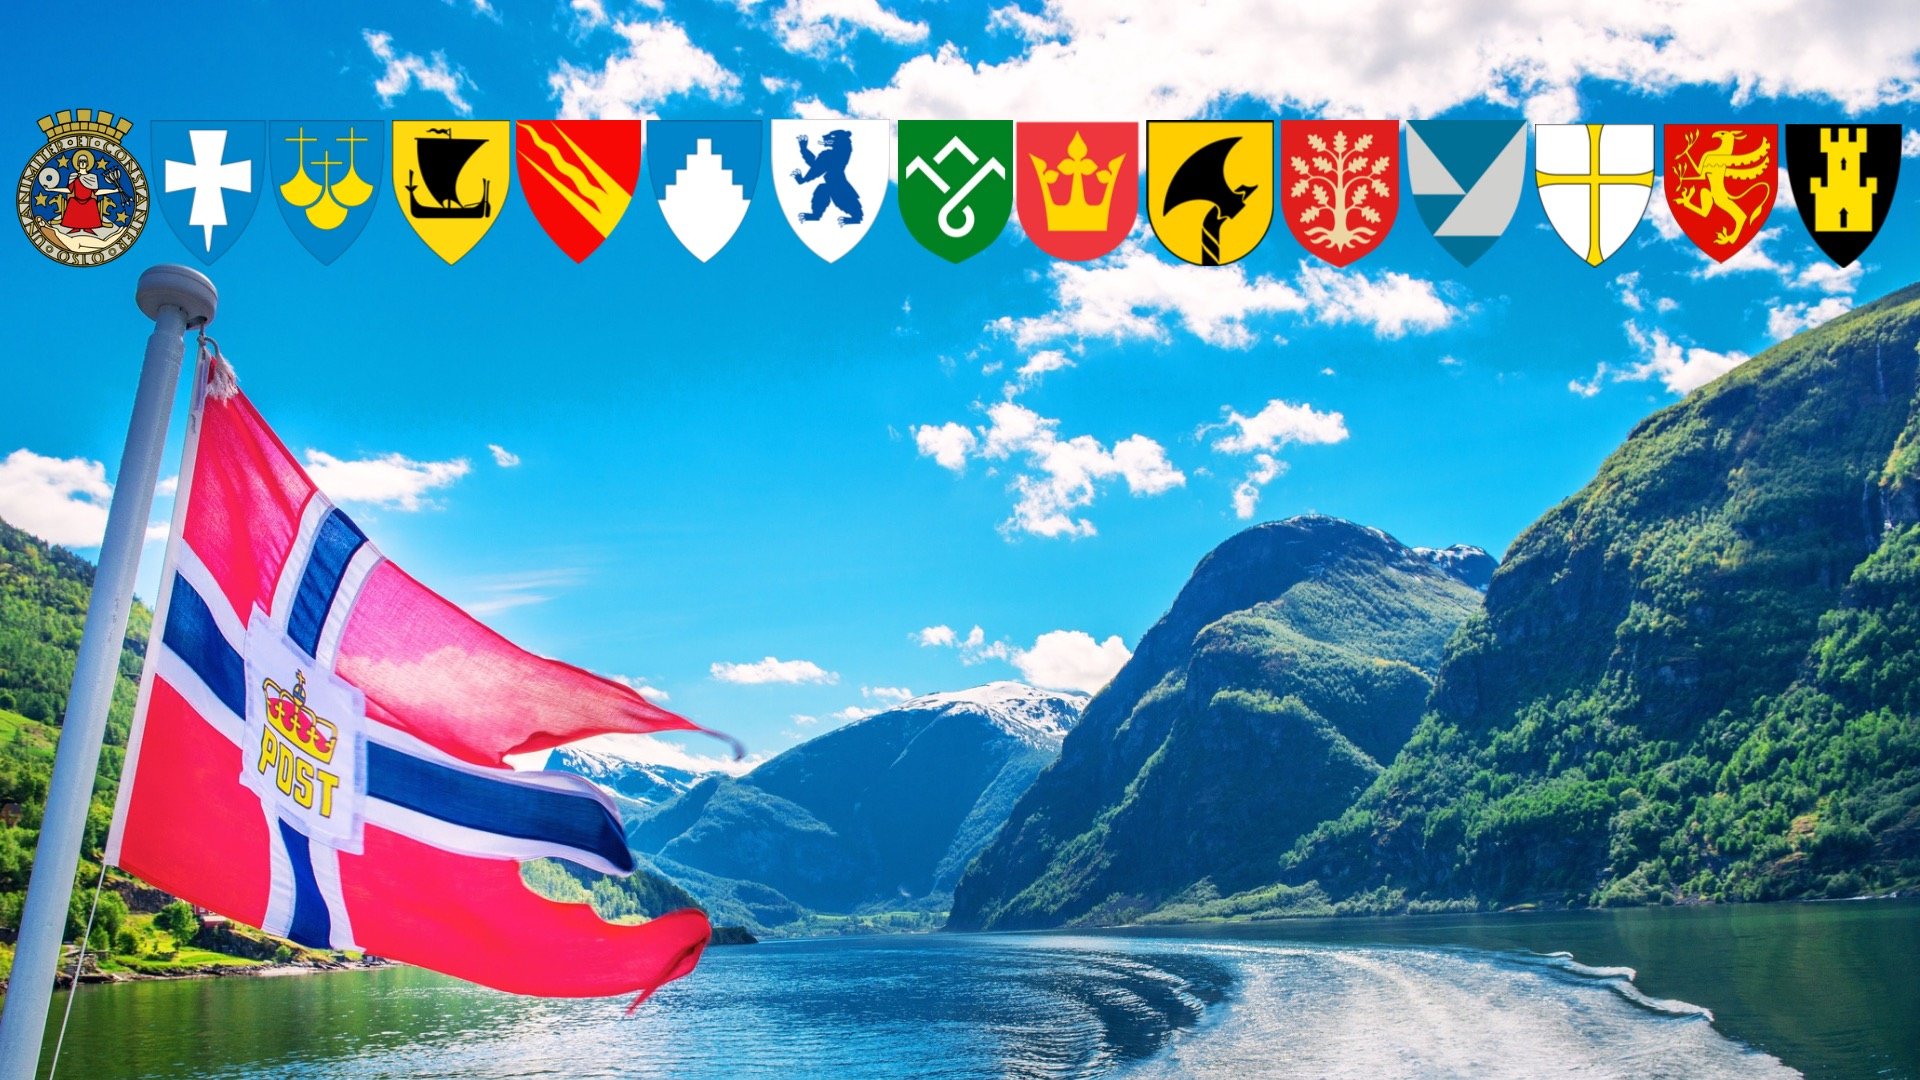 Norway fjord landscape with county crests.